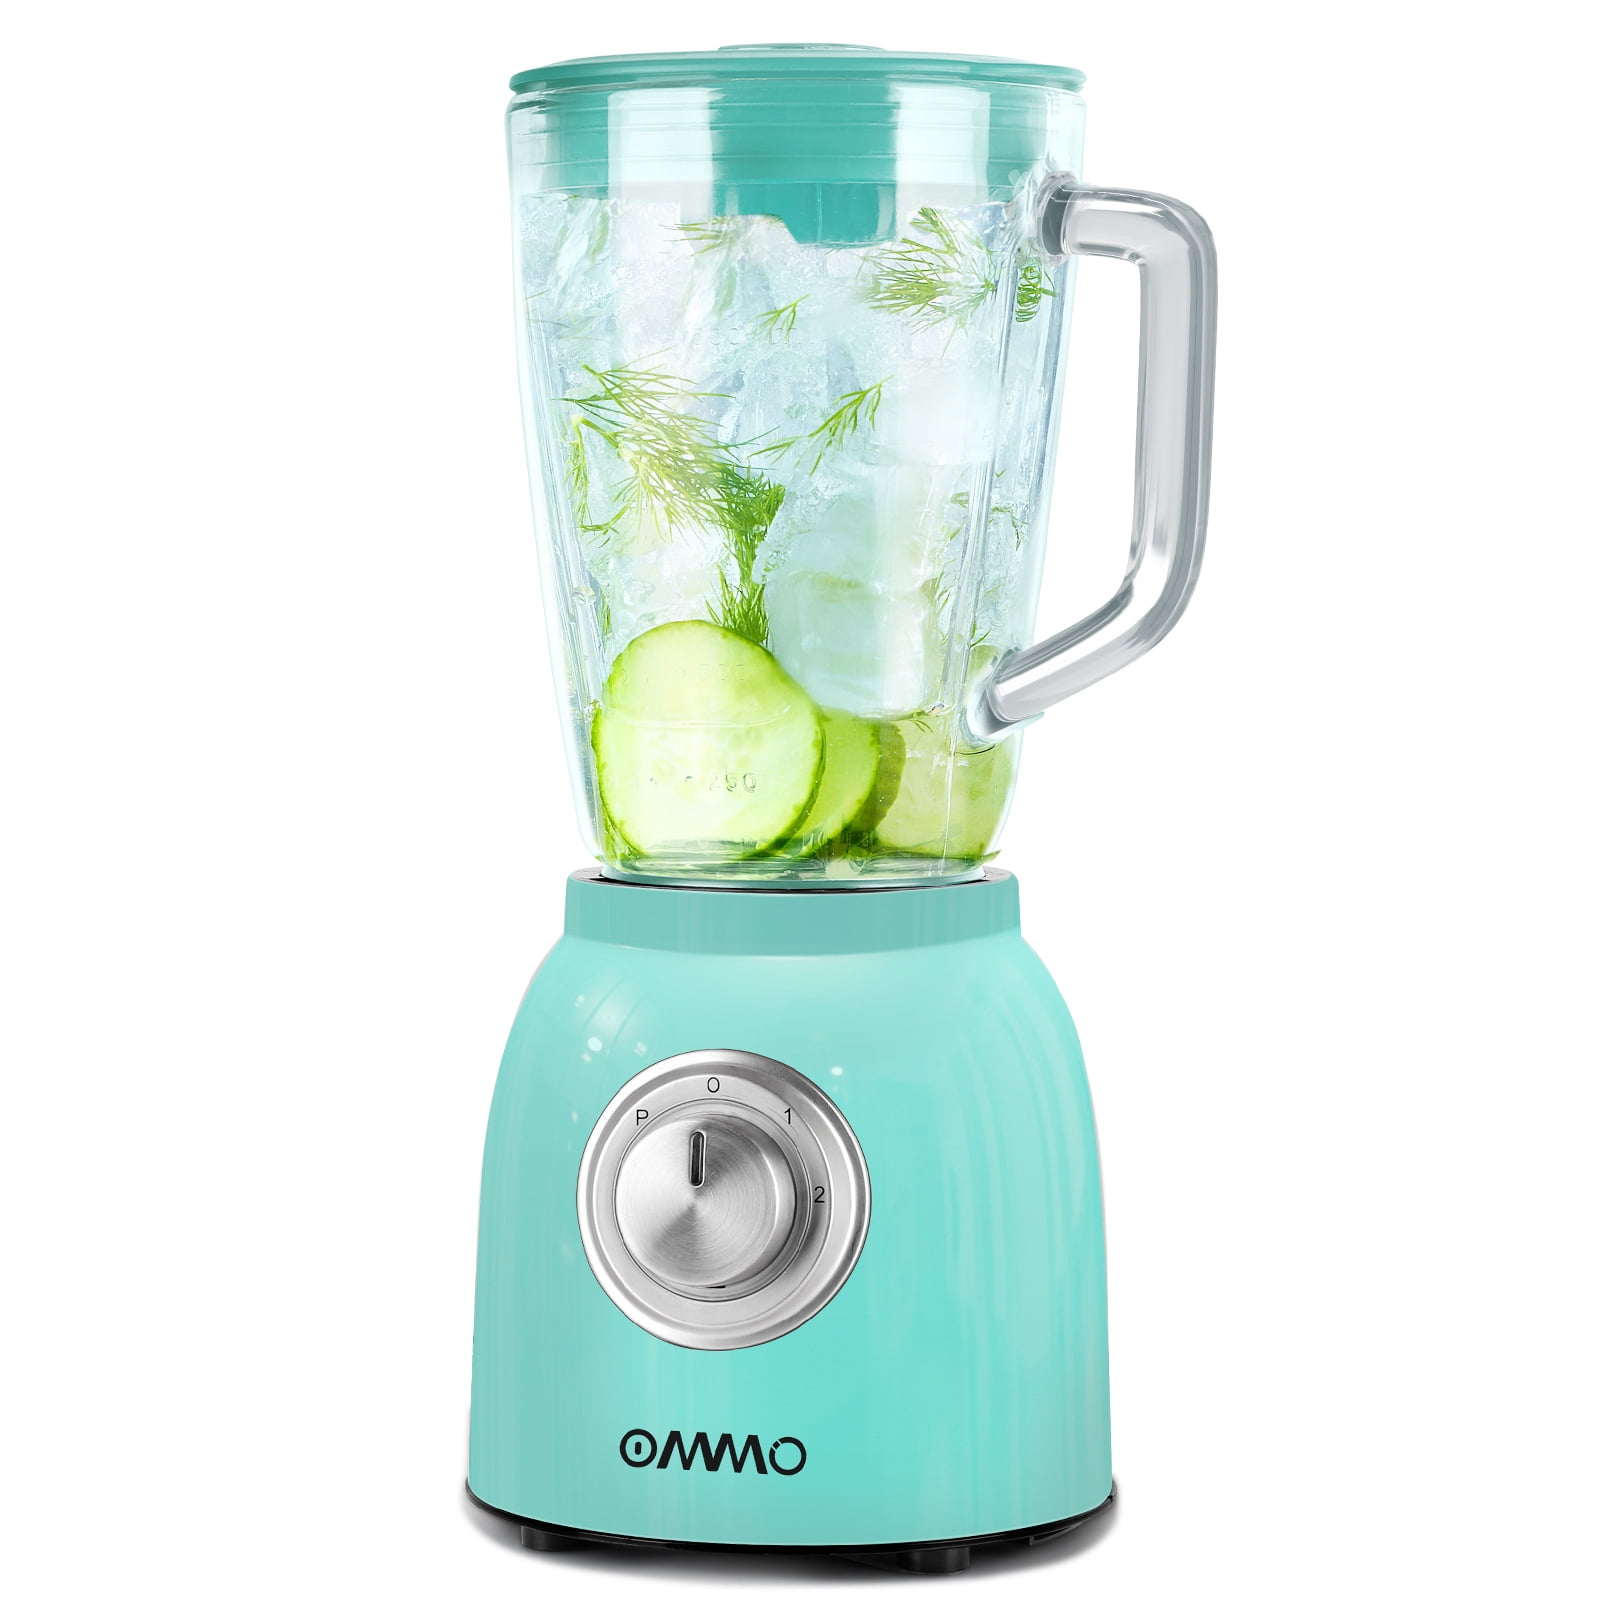 OMMO Blender for Kitchen, 53oz/1.5L Glass Jar Speeds Countertop Blender with Removable Stainless Steel Blades for Smoothies Frozen Drinks Ice Crush, Green Walmart.com